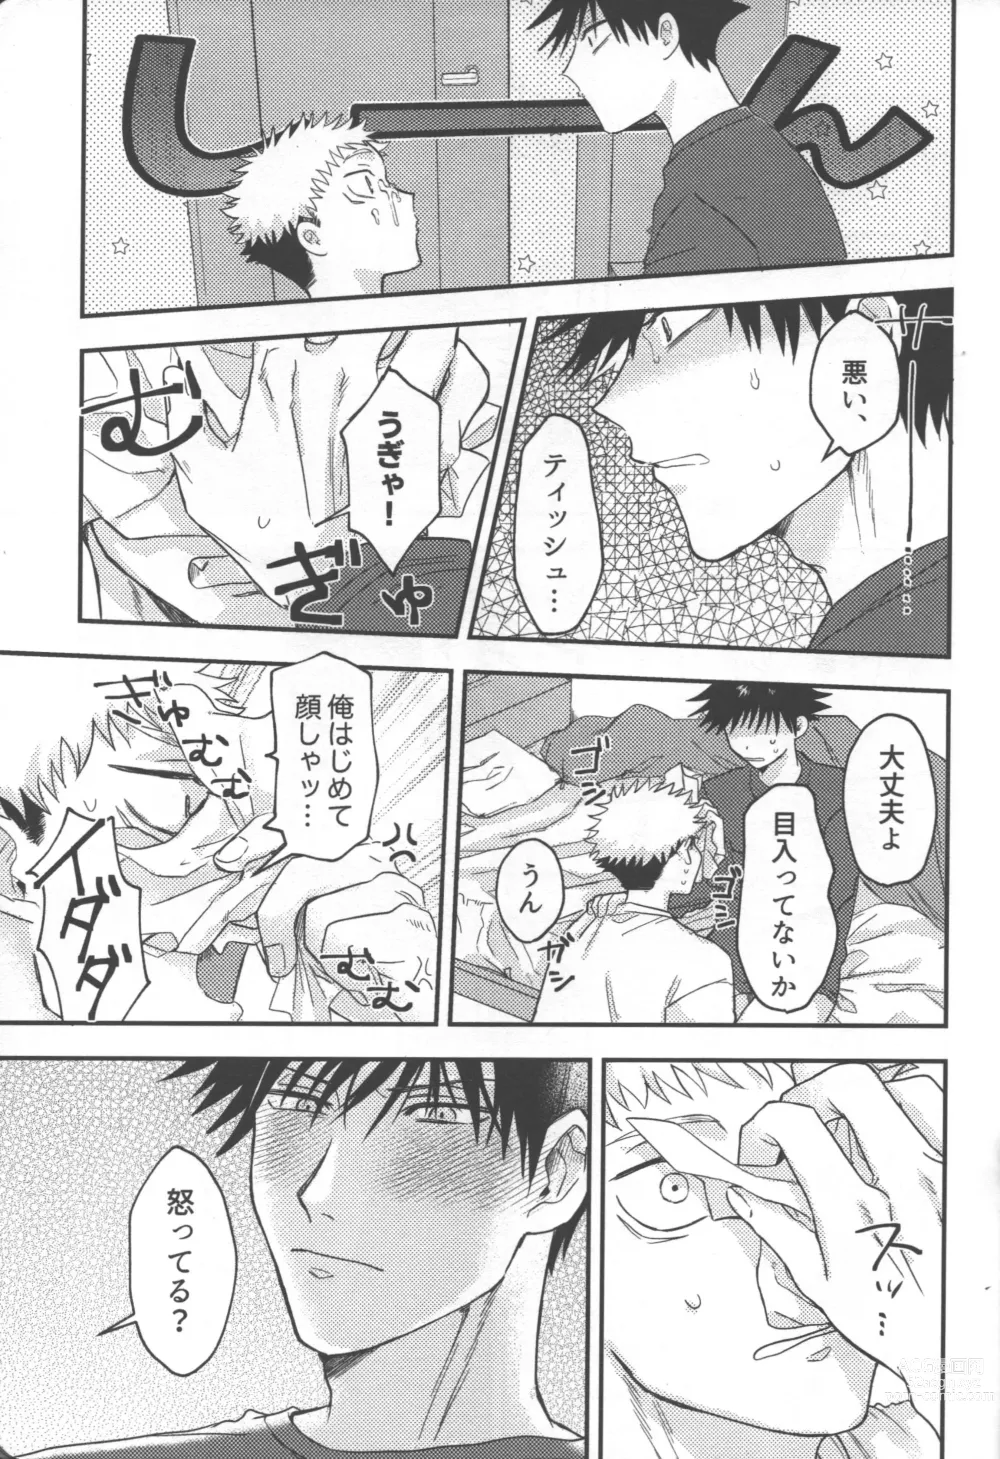 Page 20 of doujinshi Dont Look at ME Like That.